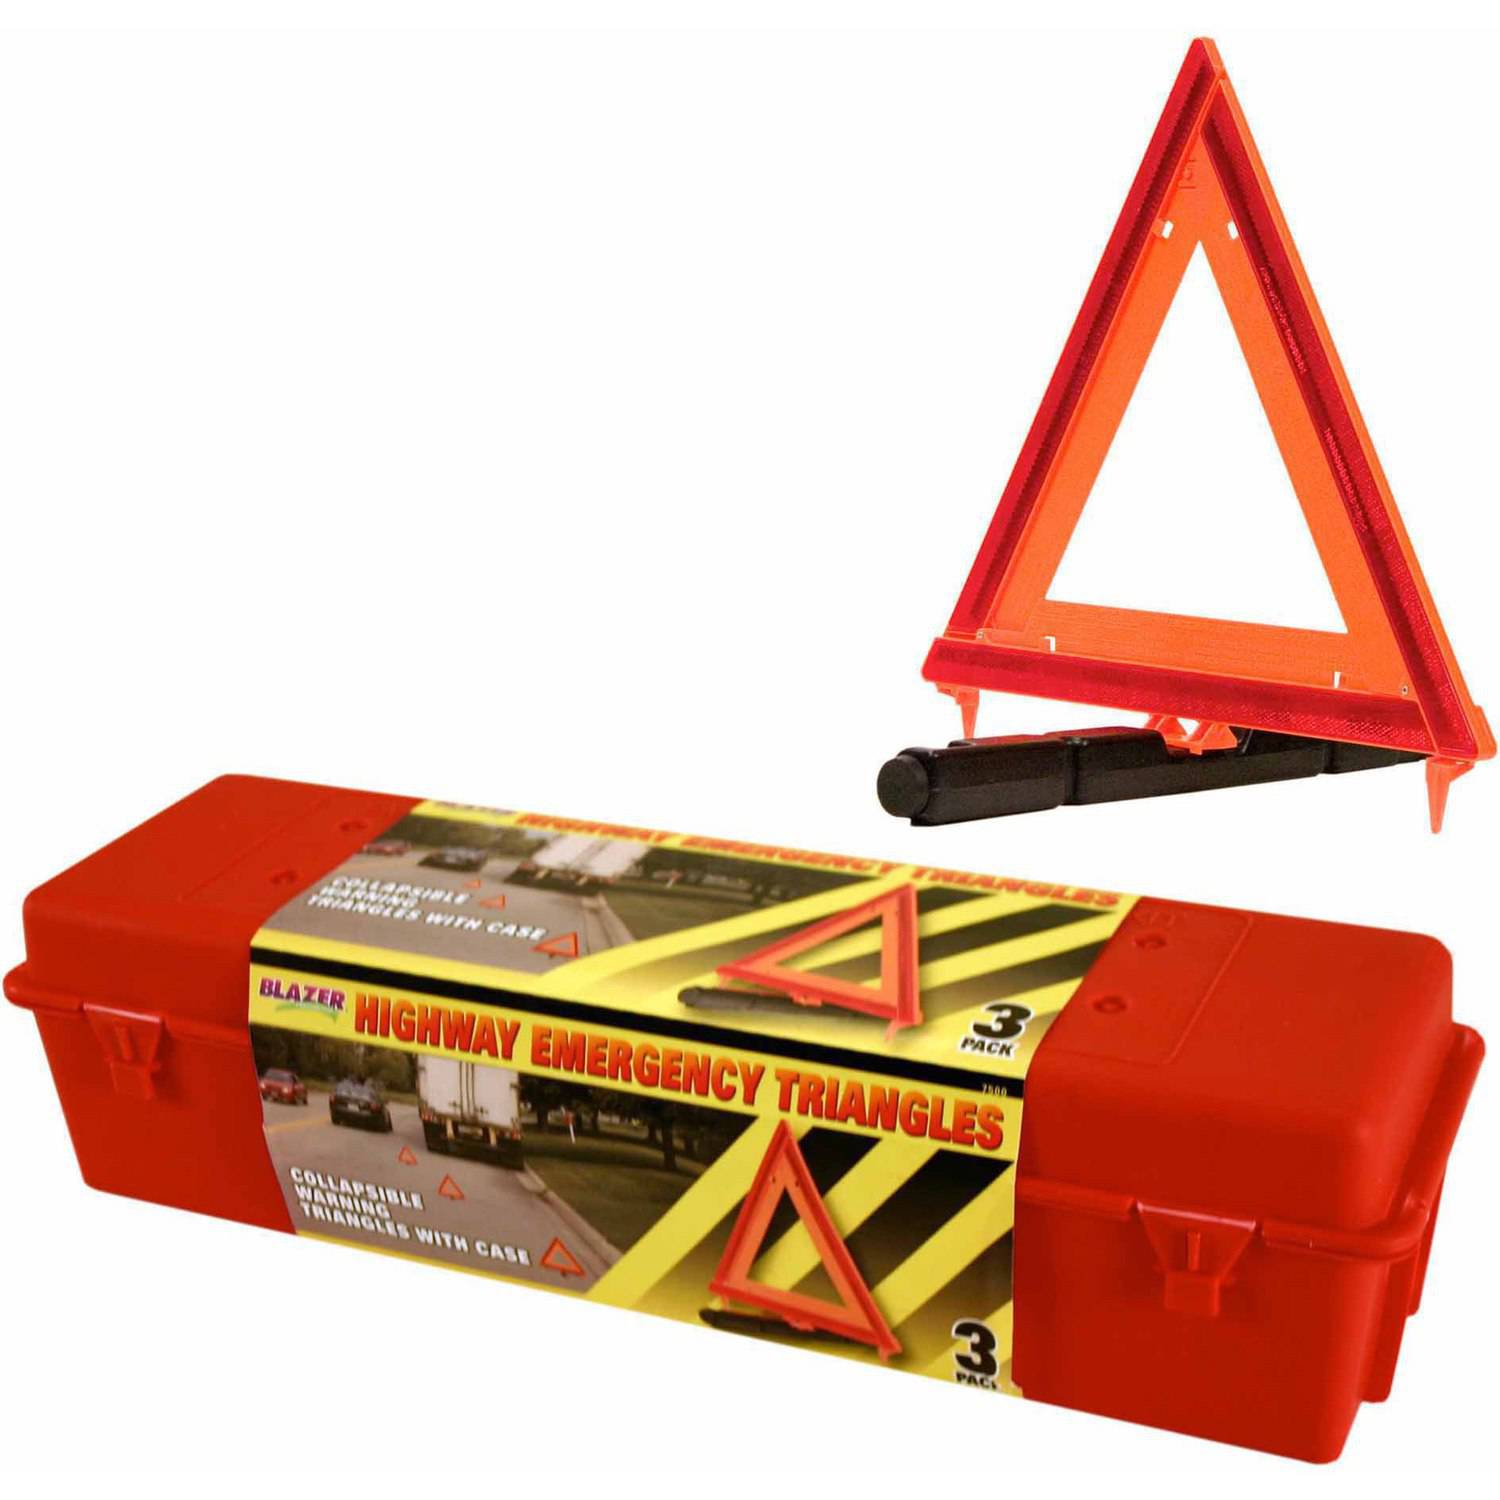 Blazer 7500 Collapsible Warning Triangles, 3pk - image 2 of 7